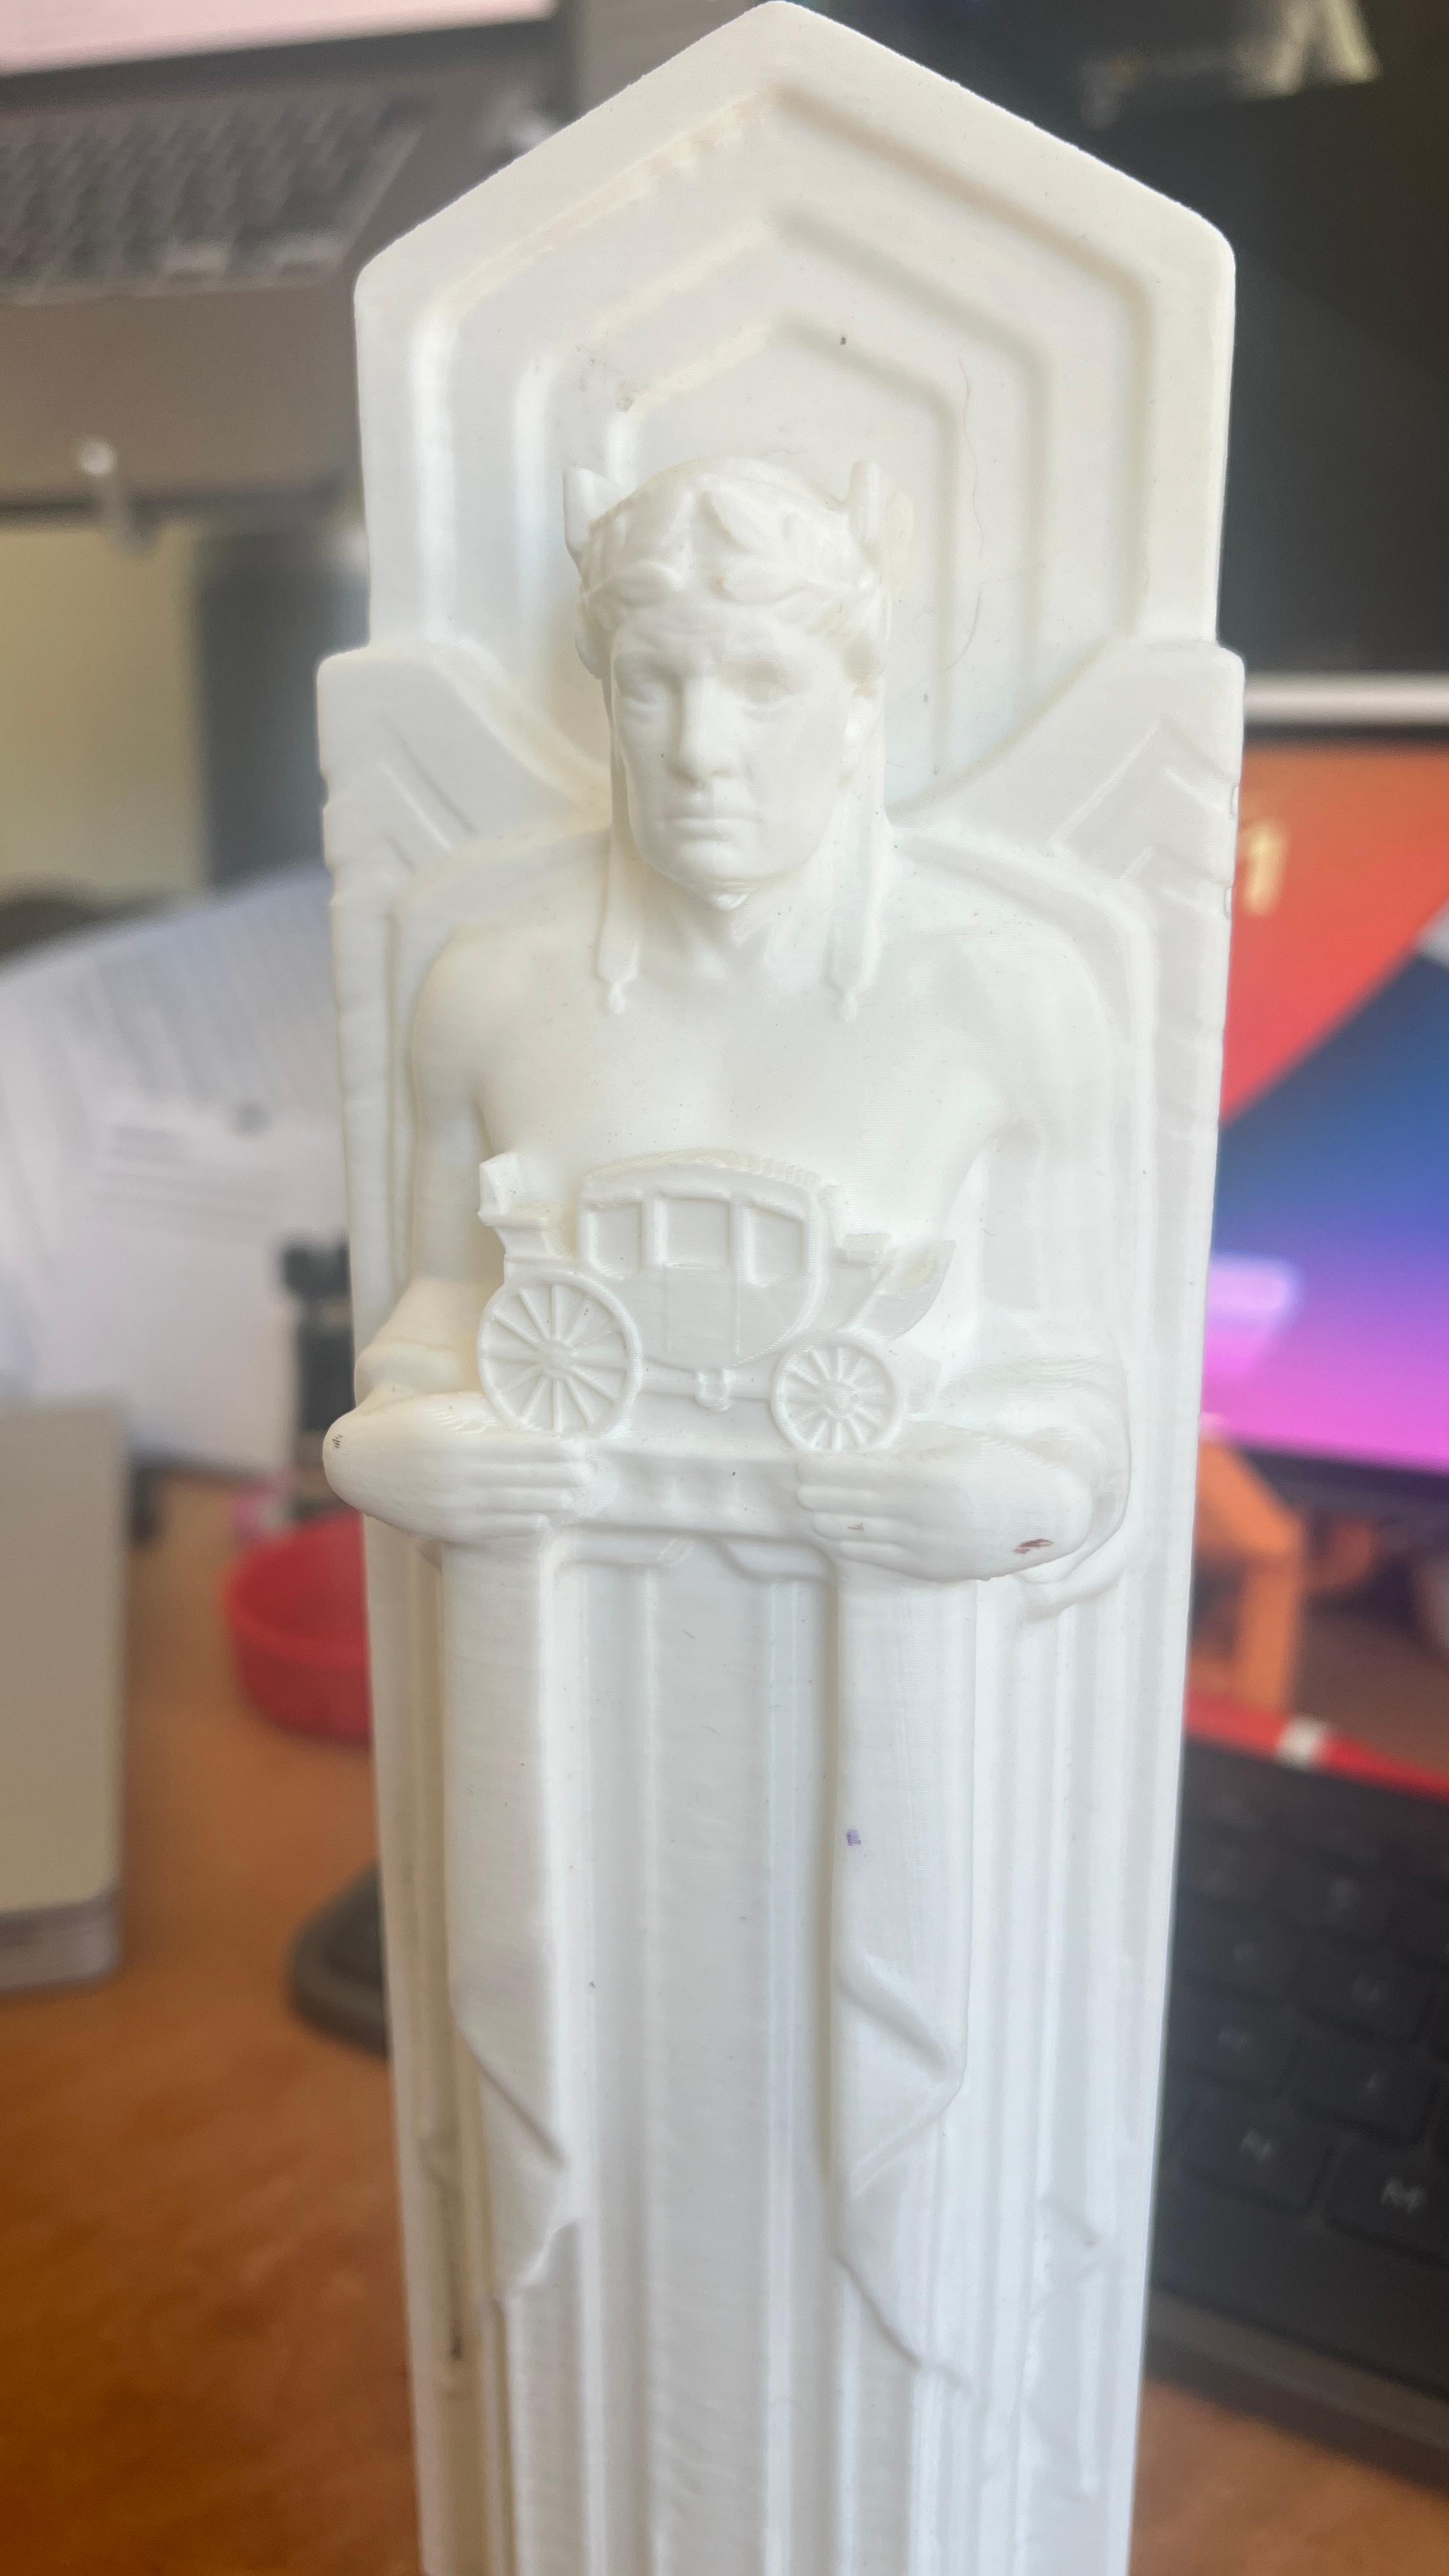 The Guardian of Transportation - Tallest print(about 9 inches) I have done on the Ender 3 pro to date. Came out great! - 3d model